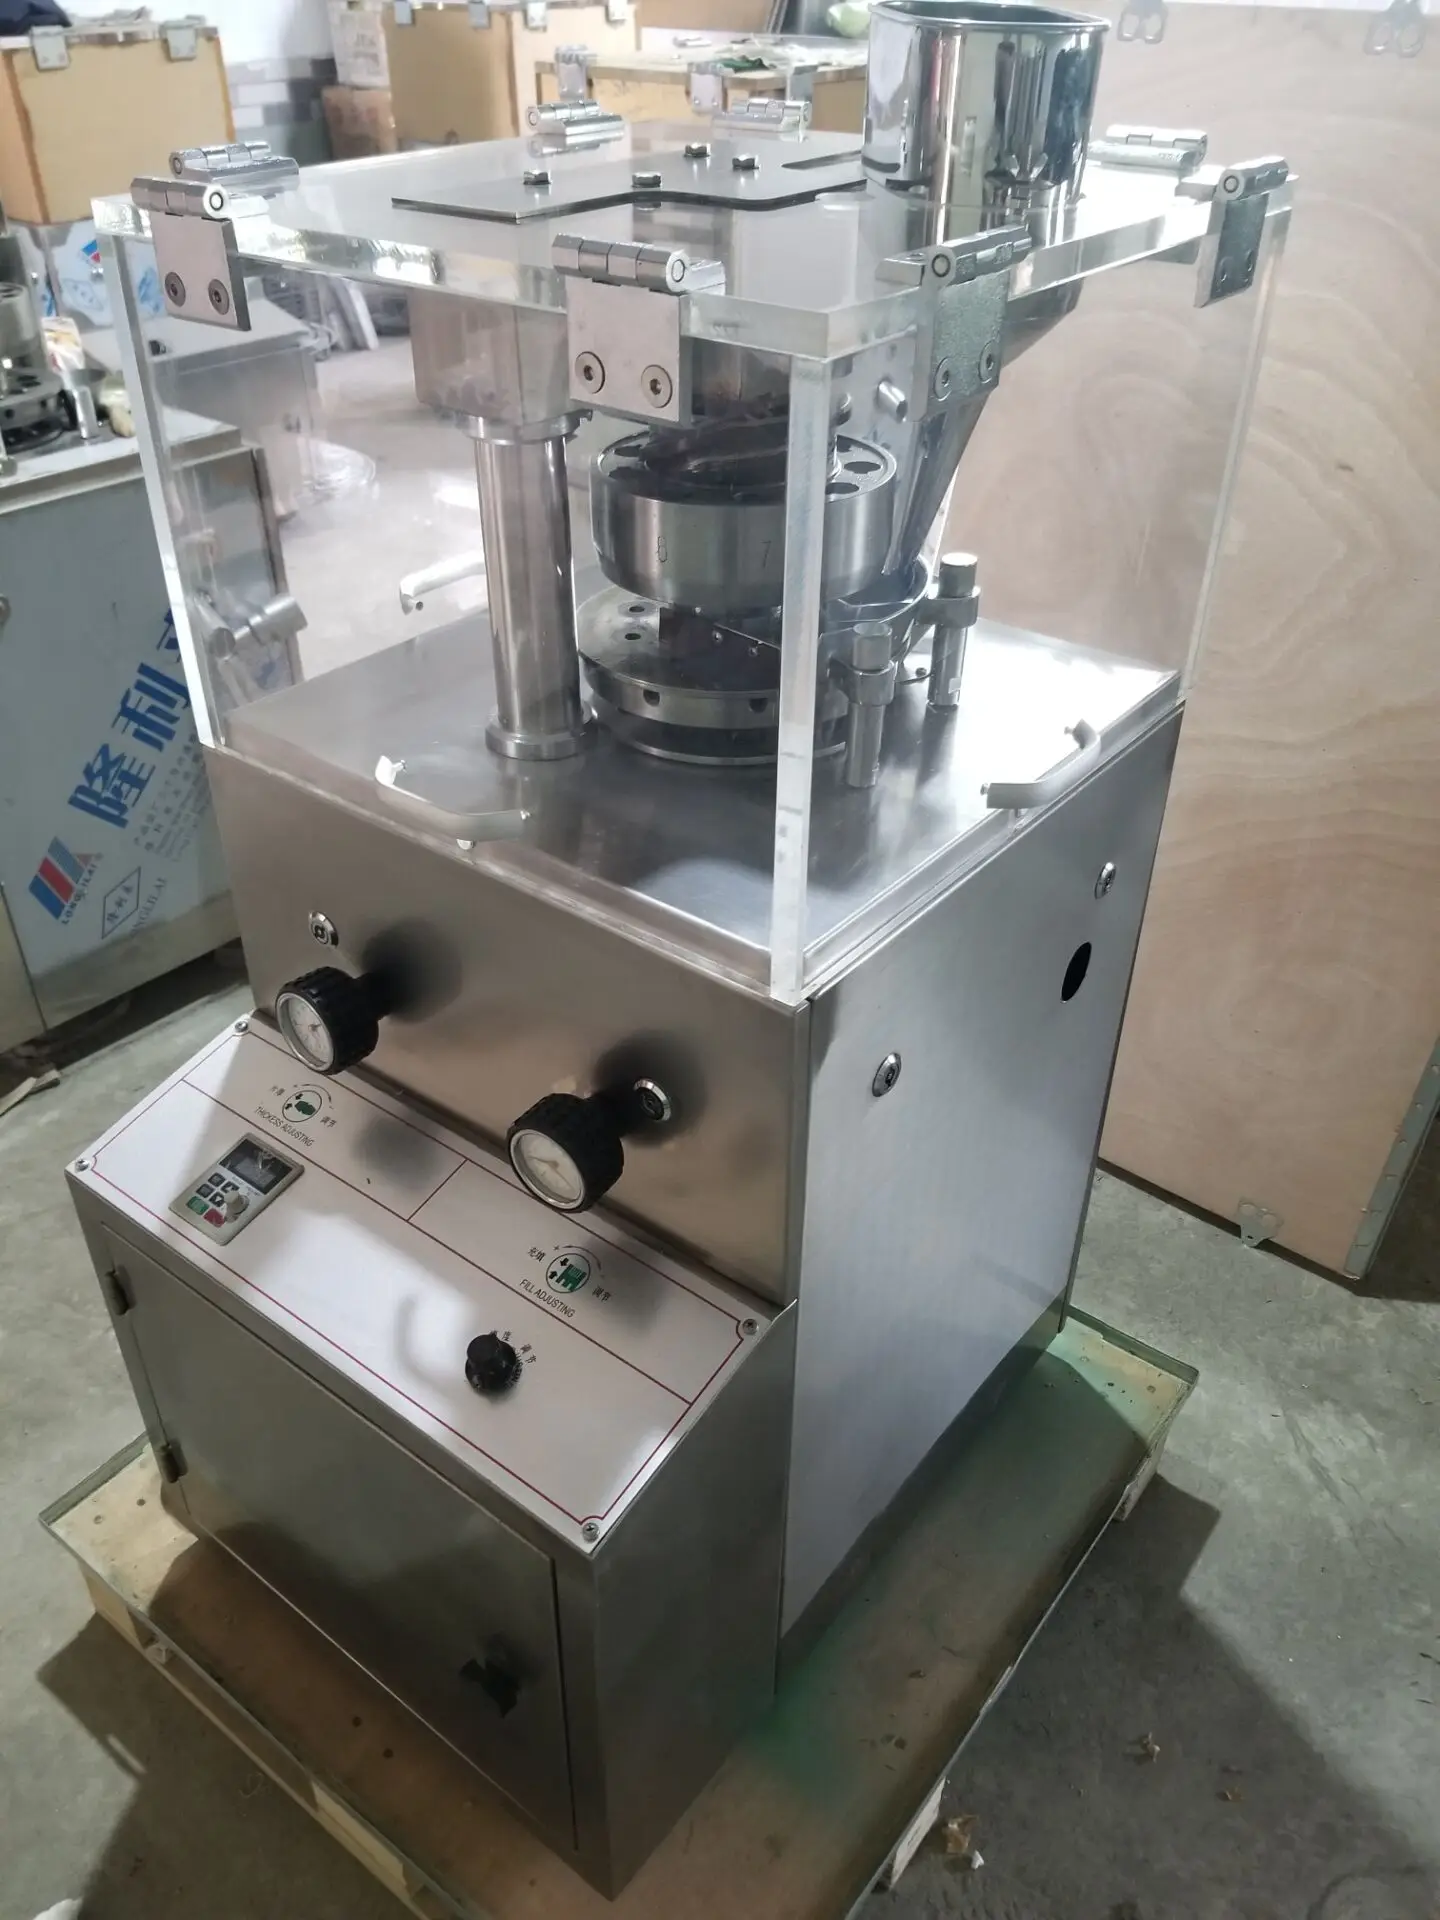 product-ZP9 Stainless Steel Fully Automatic MINI Zp 5 Rotary Tablet Press-PHARMA-img-1